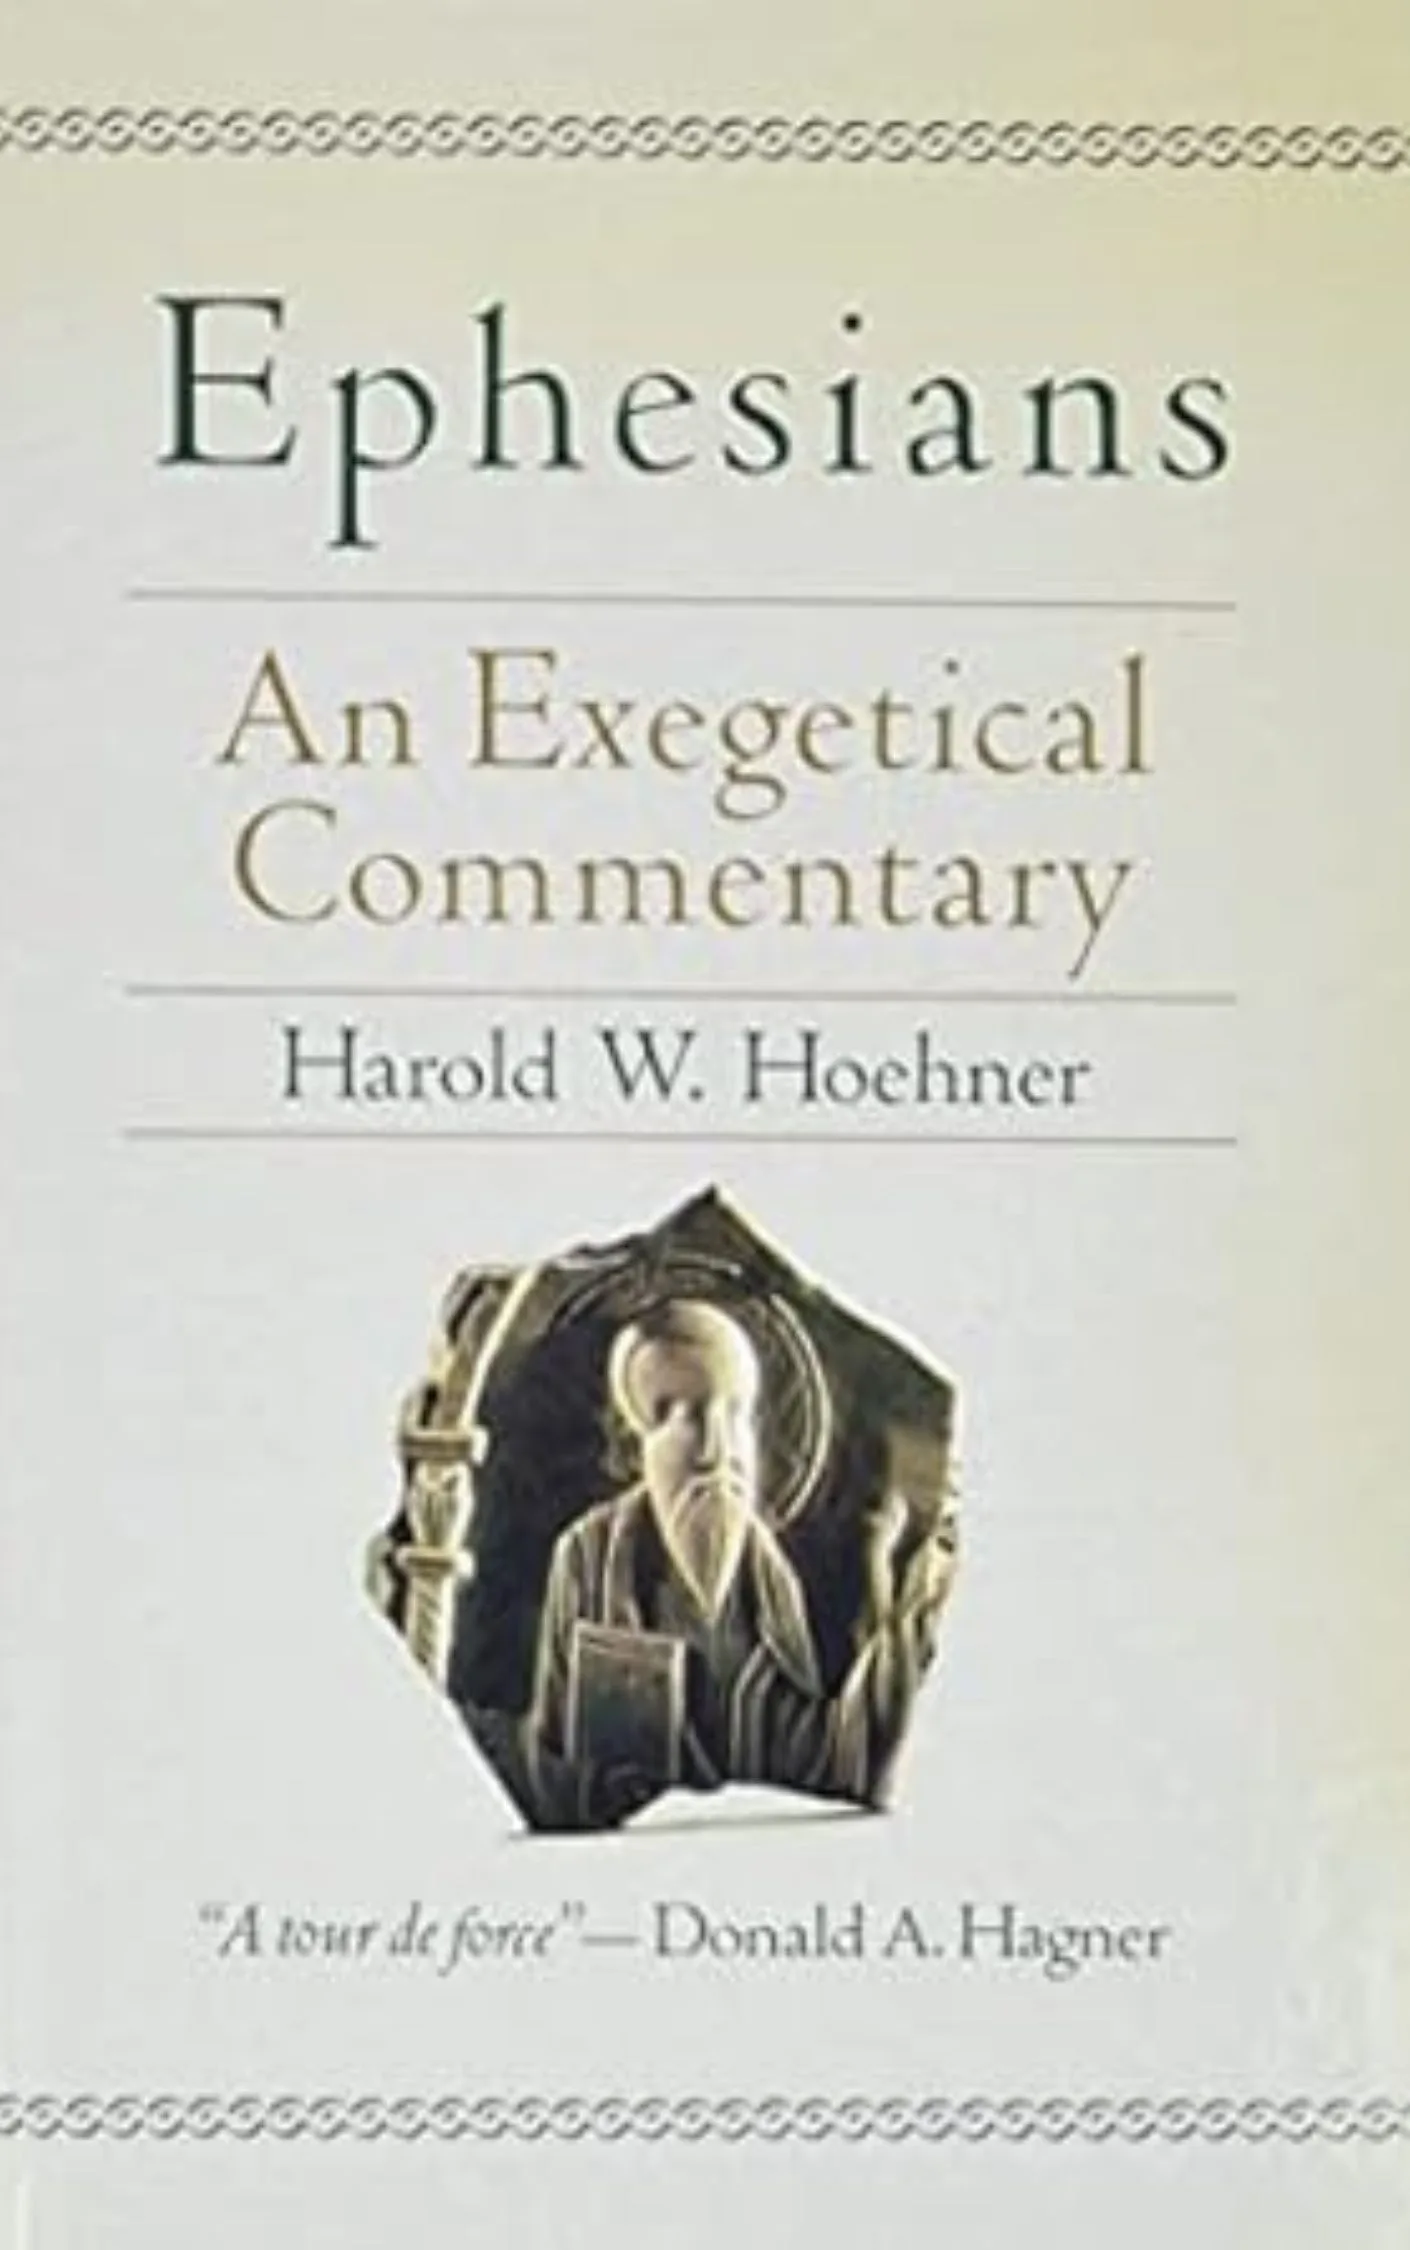 Ephesians: An Exegetical Commentary by Harold Hoehner